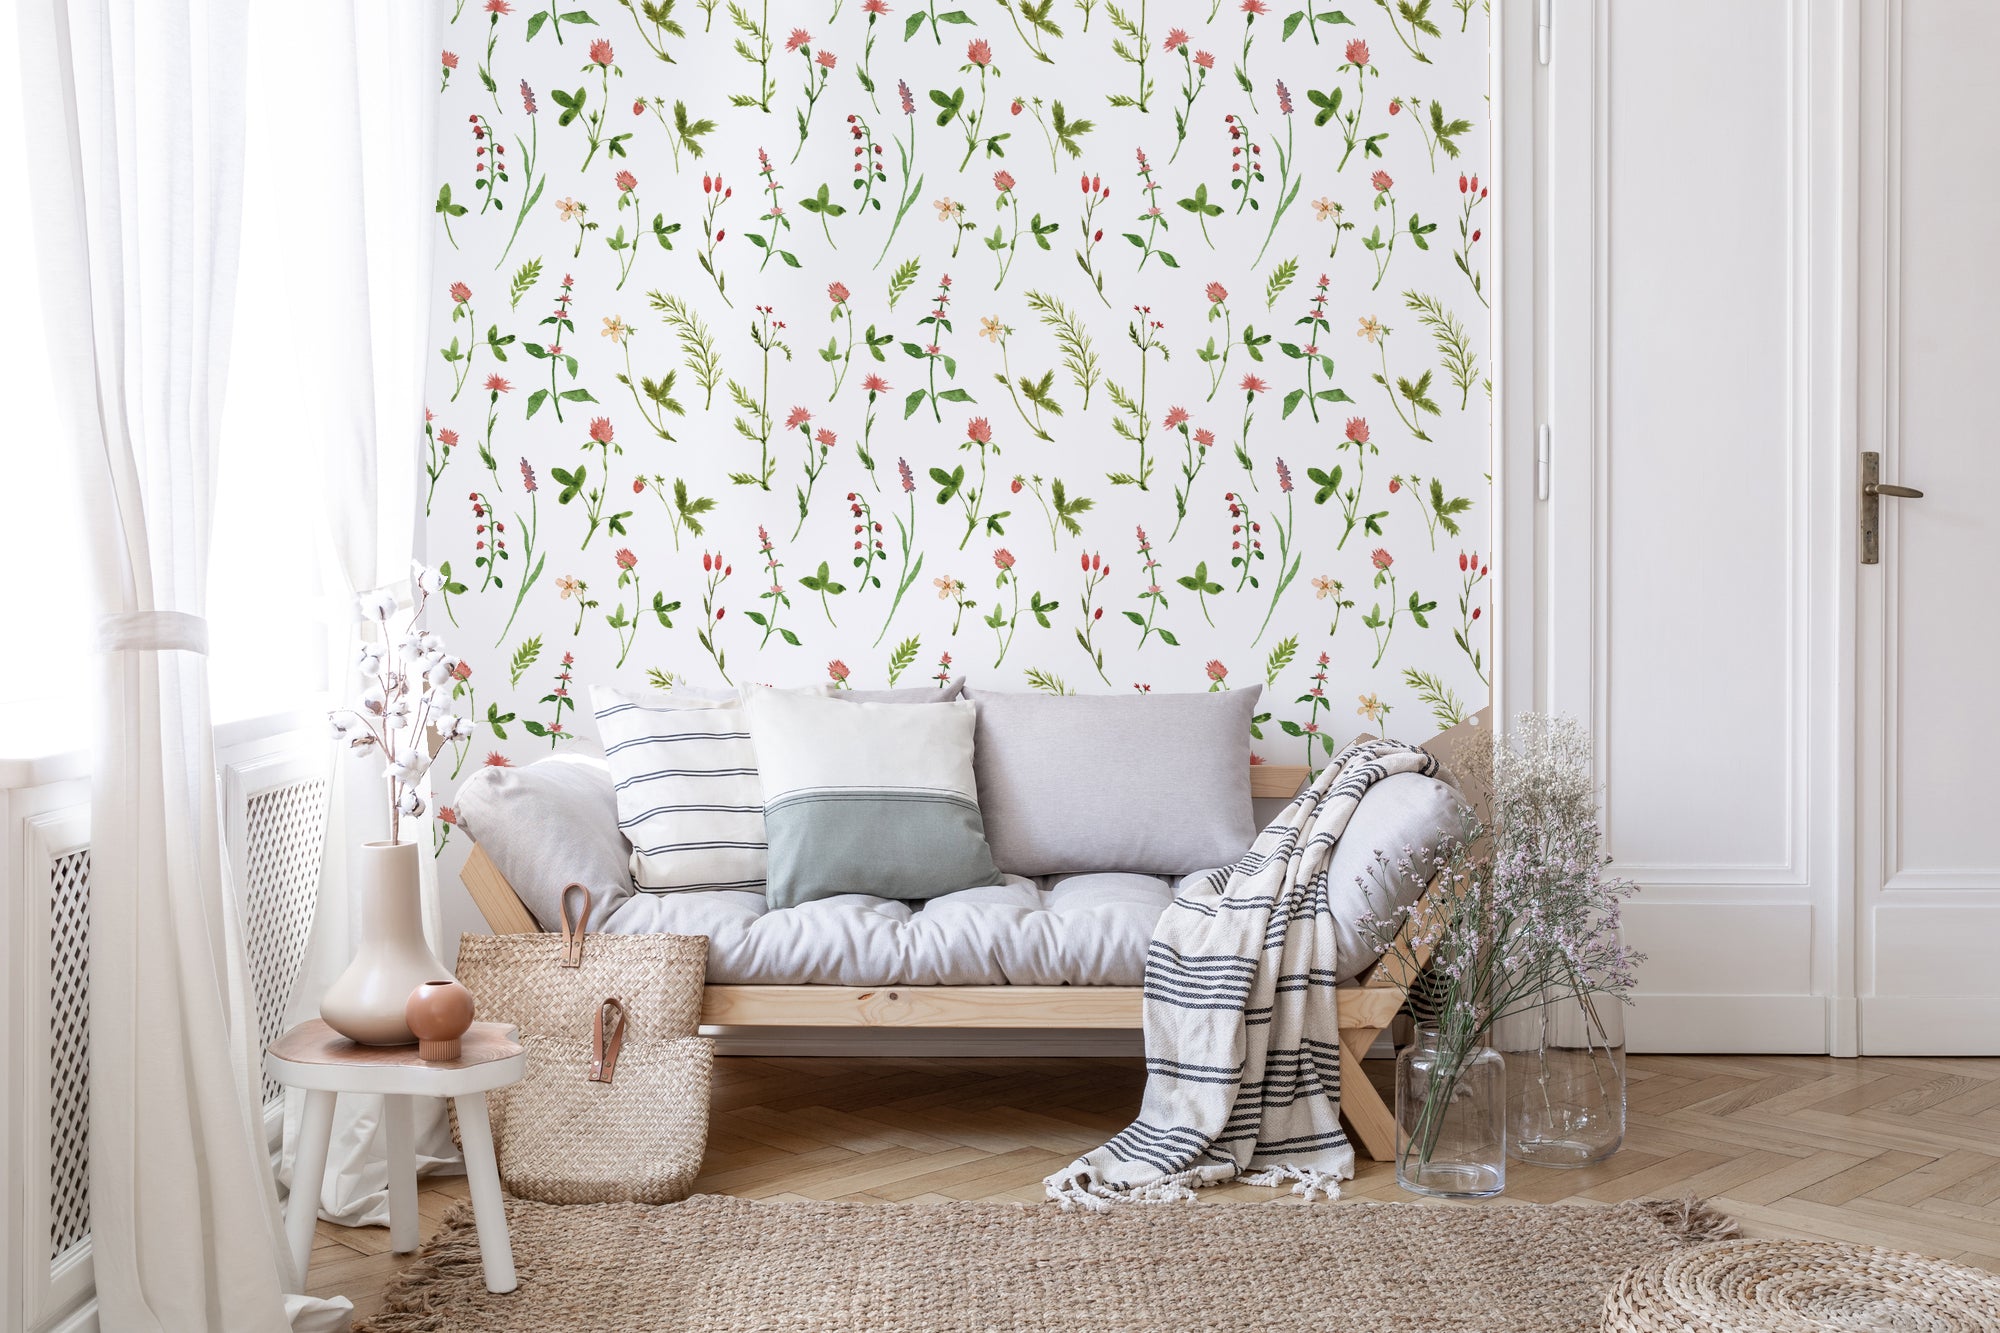 Lila, Floral Pattern Wallpaper in living room